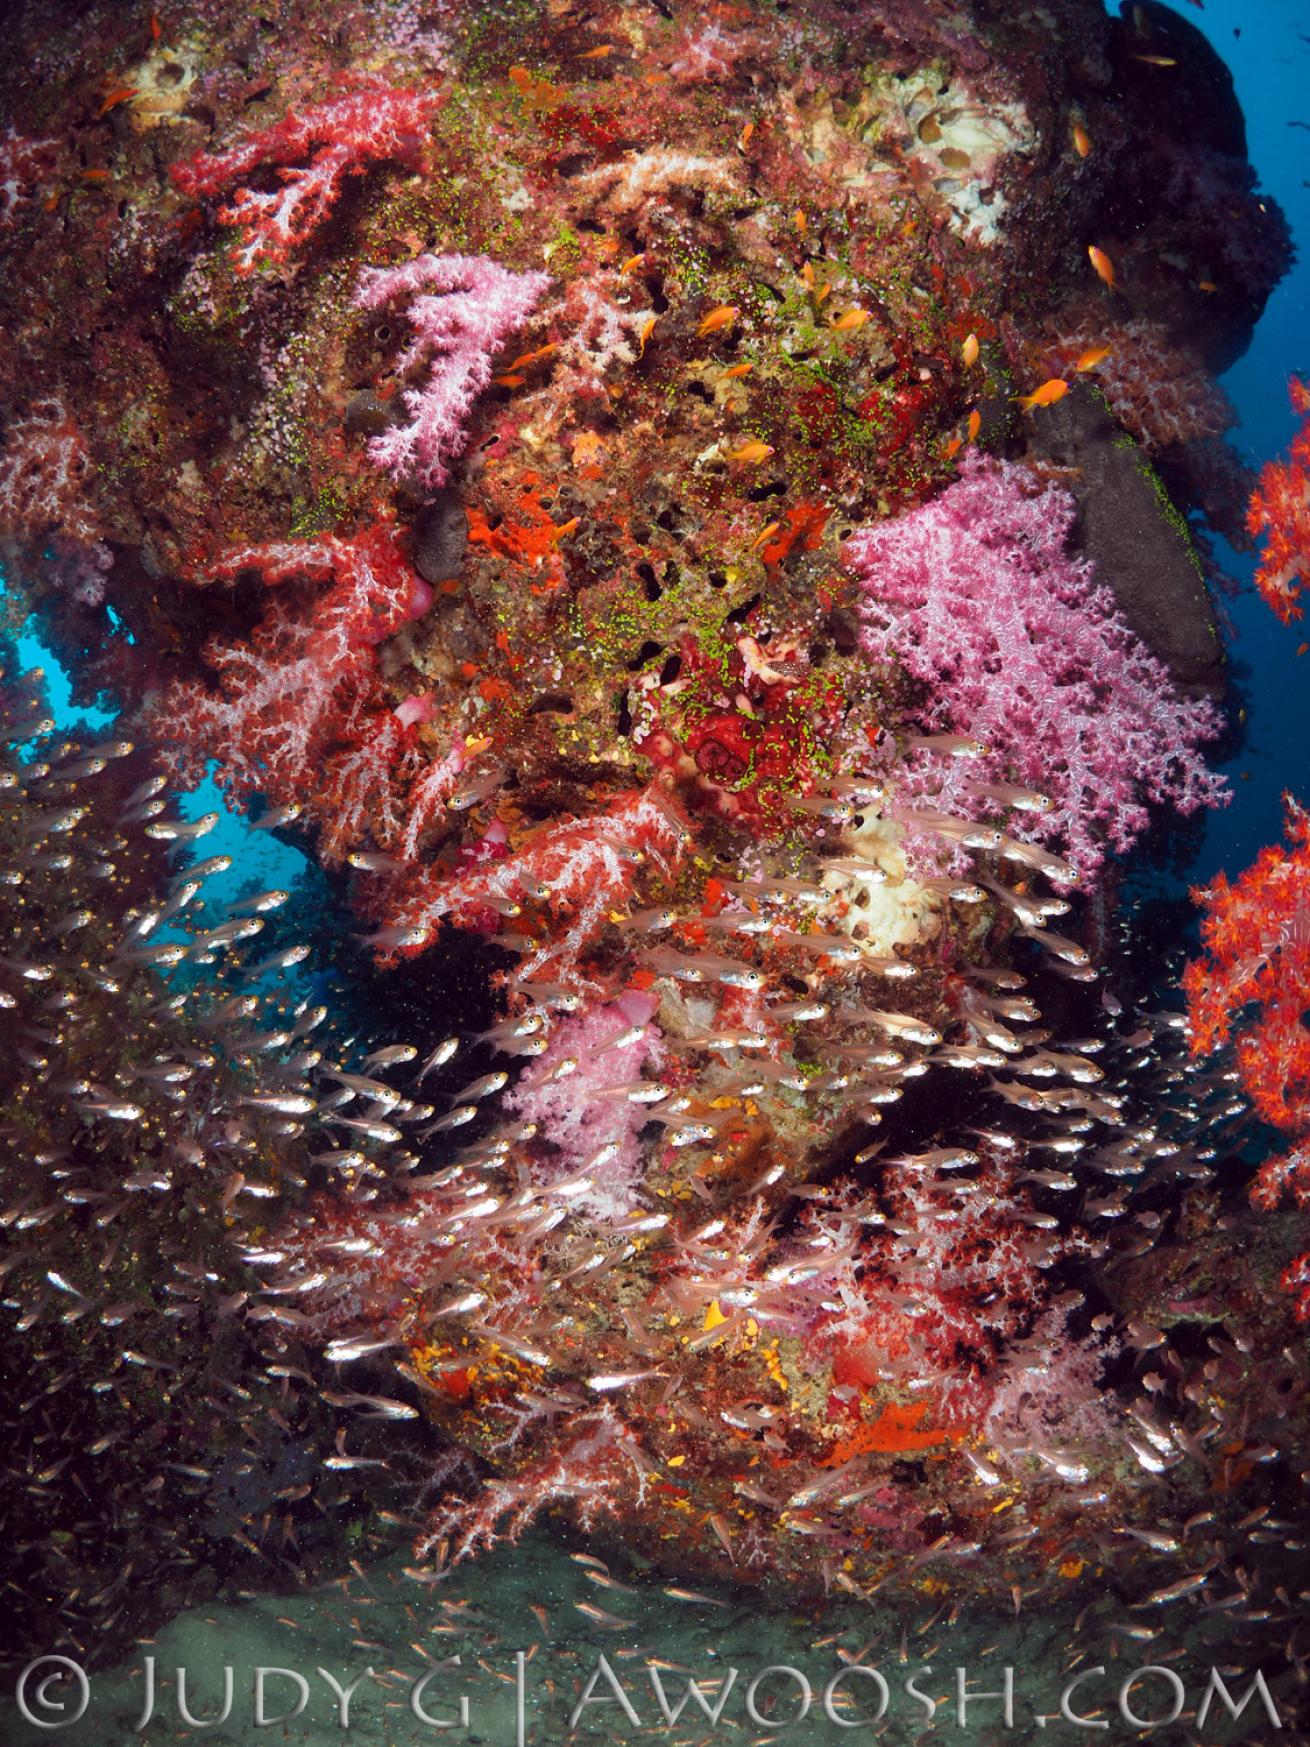 Underwater photo of a colorful soft coral reef in the Similan Islands, Thailand